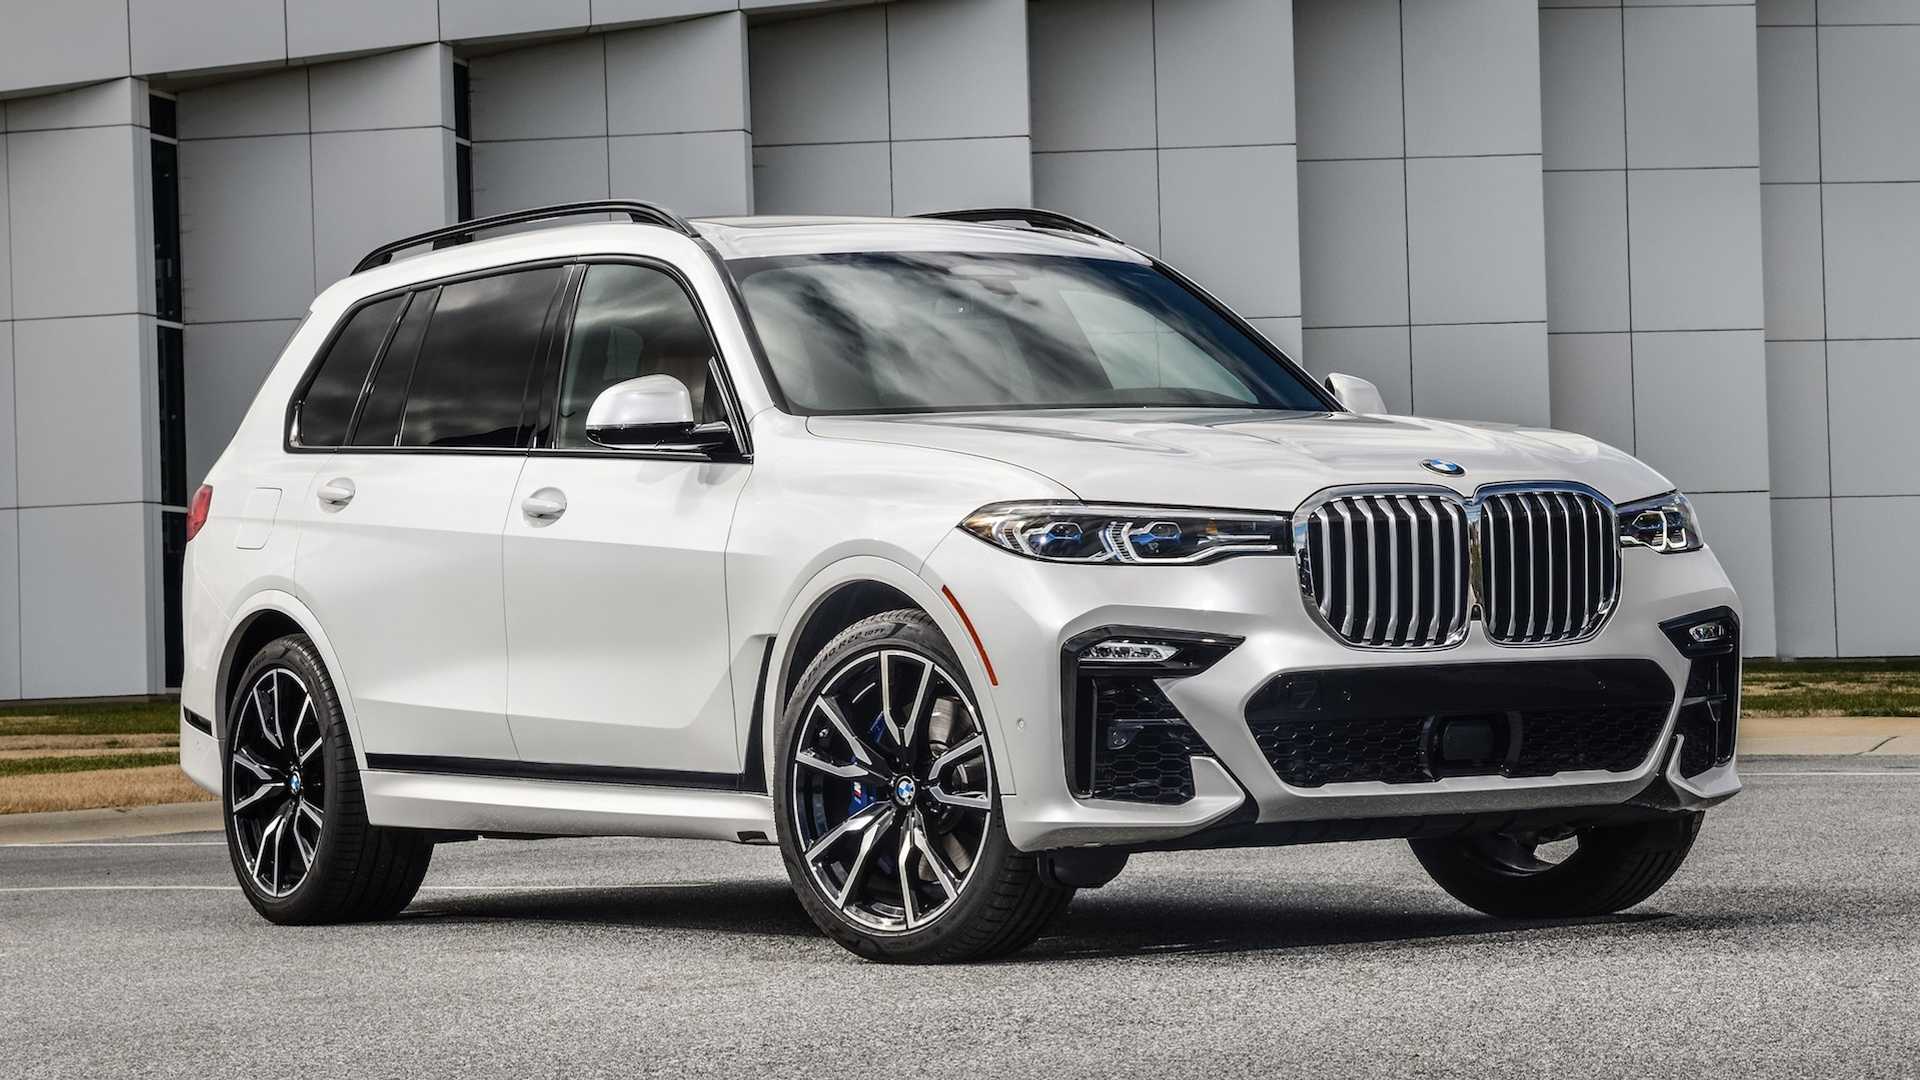 Meet The All New BMW X7. Nalley BMW Of Decatur